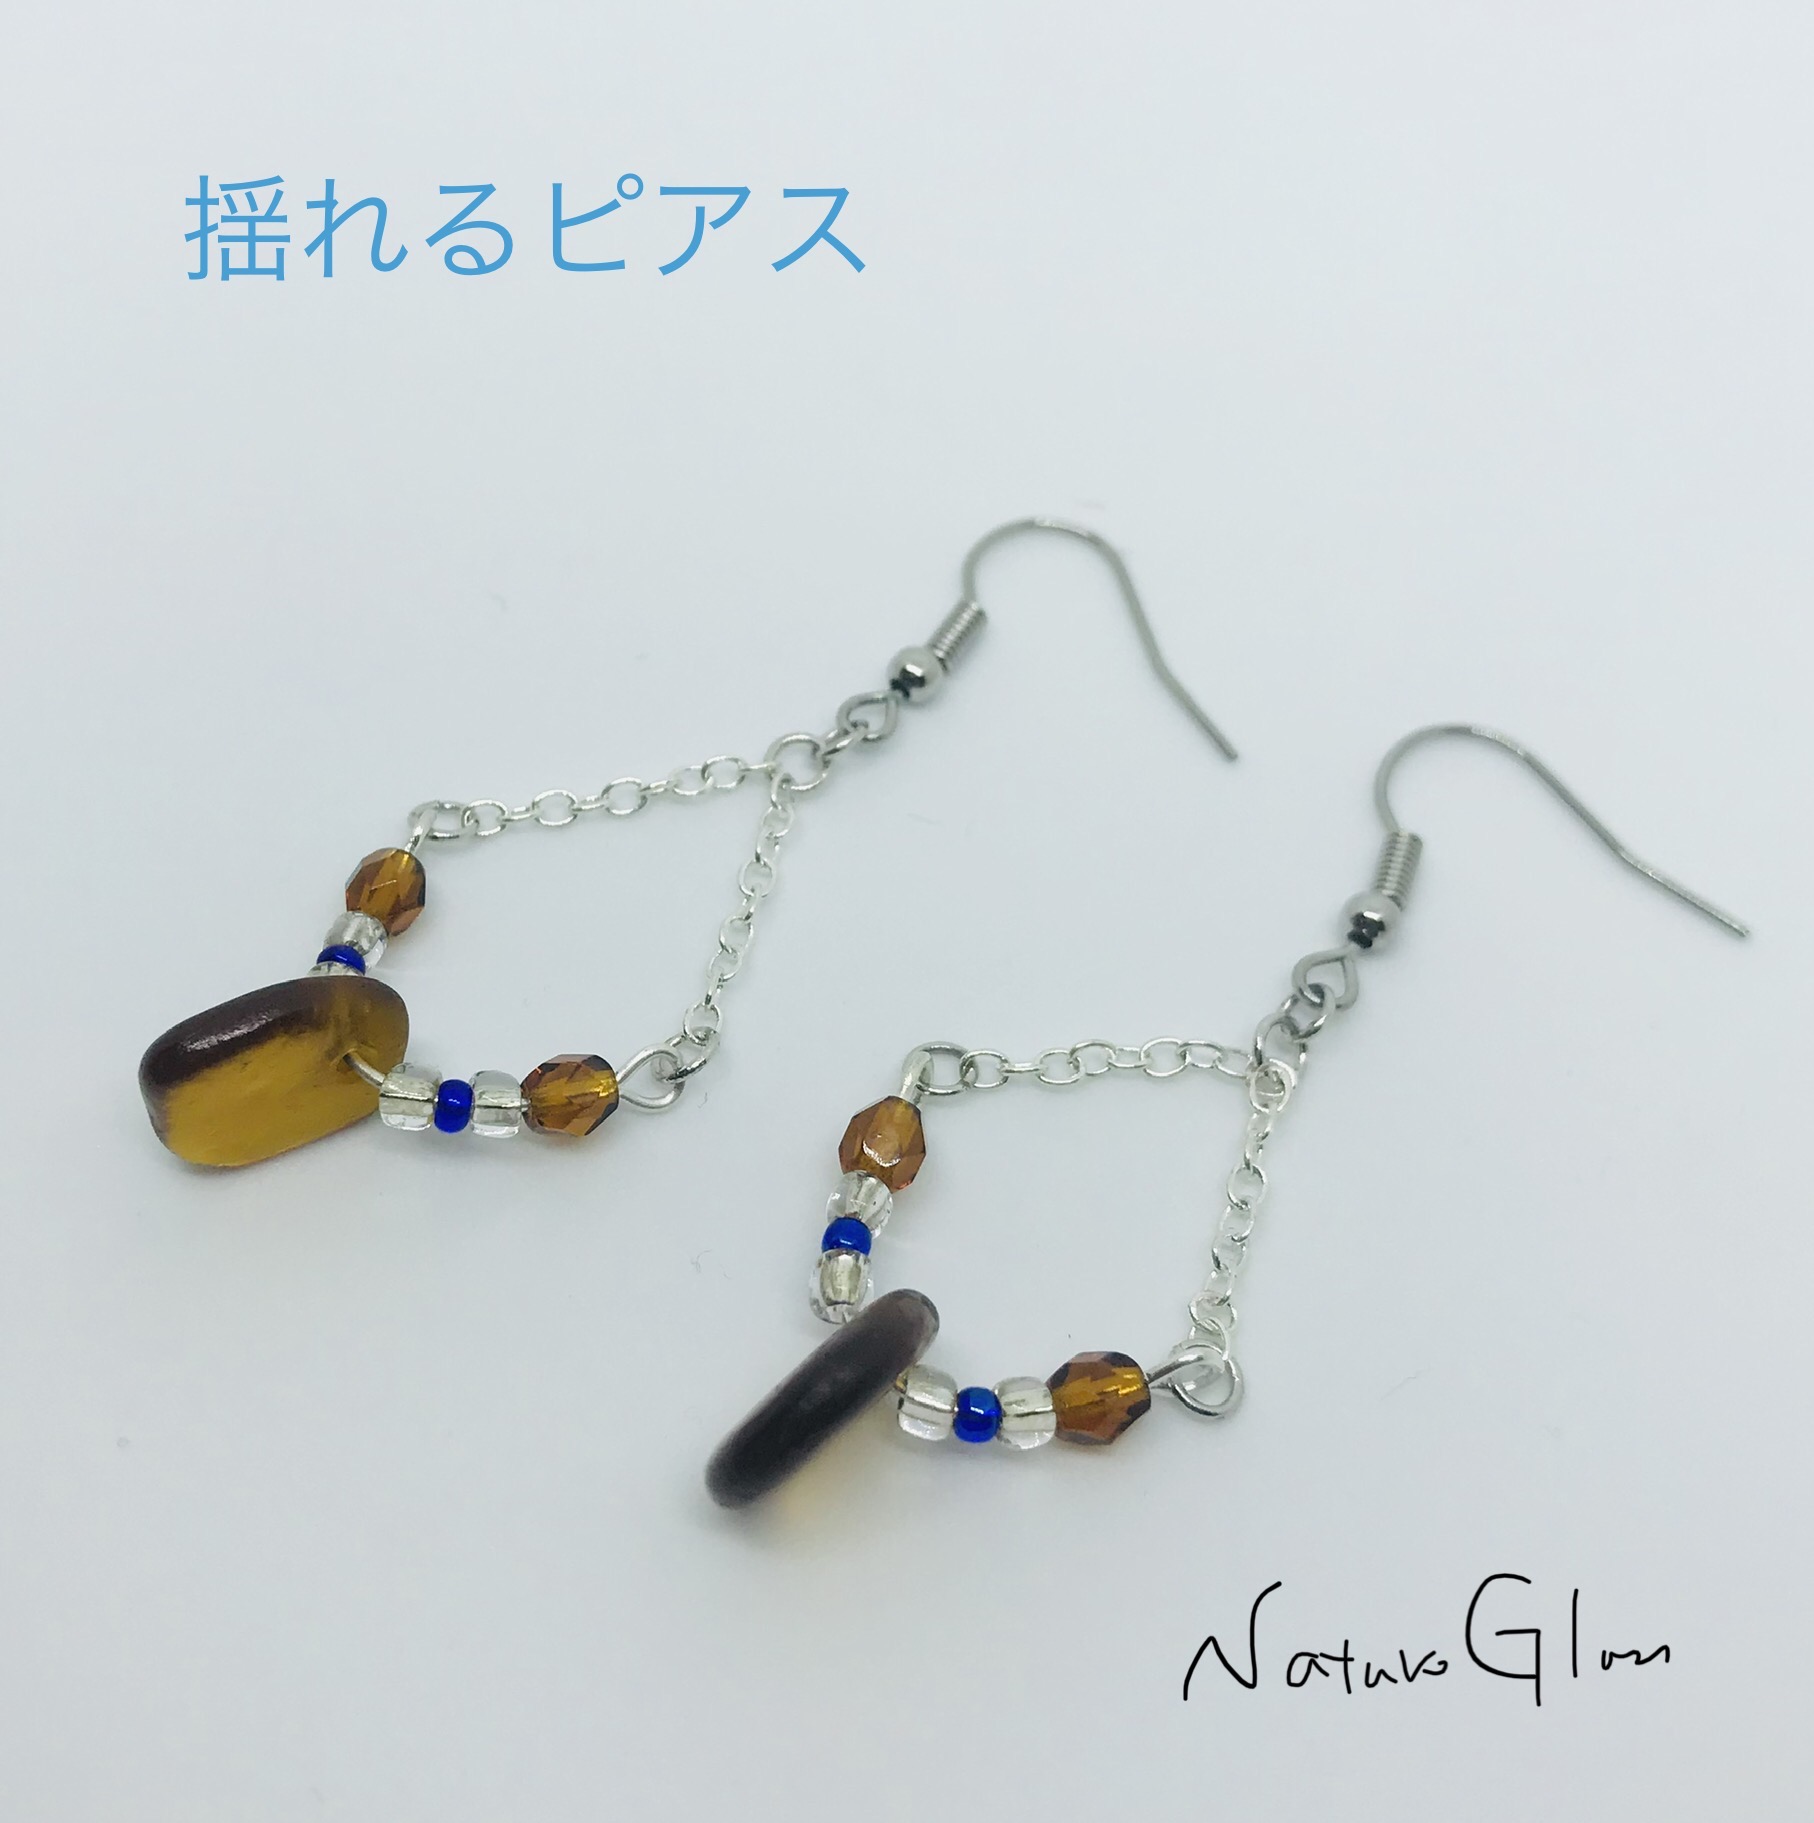 Swing Pierces with Brown Sea Glass and Beads - Nature Glass